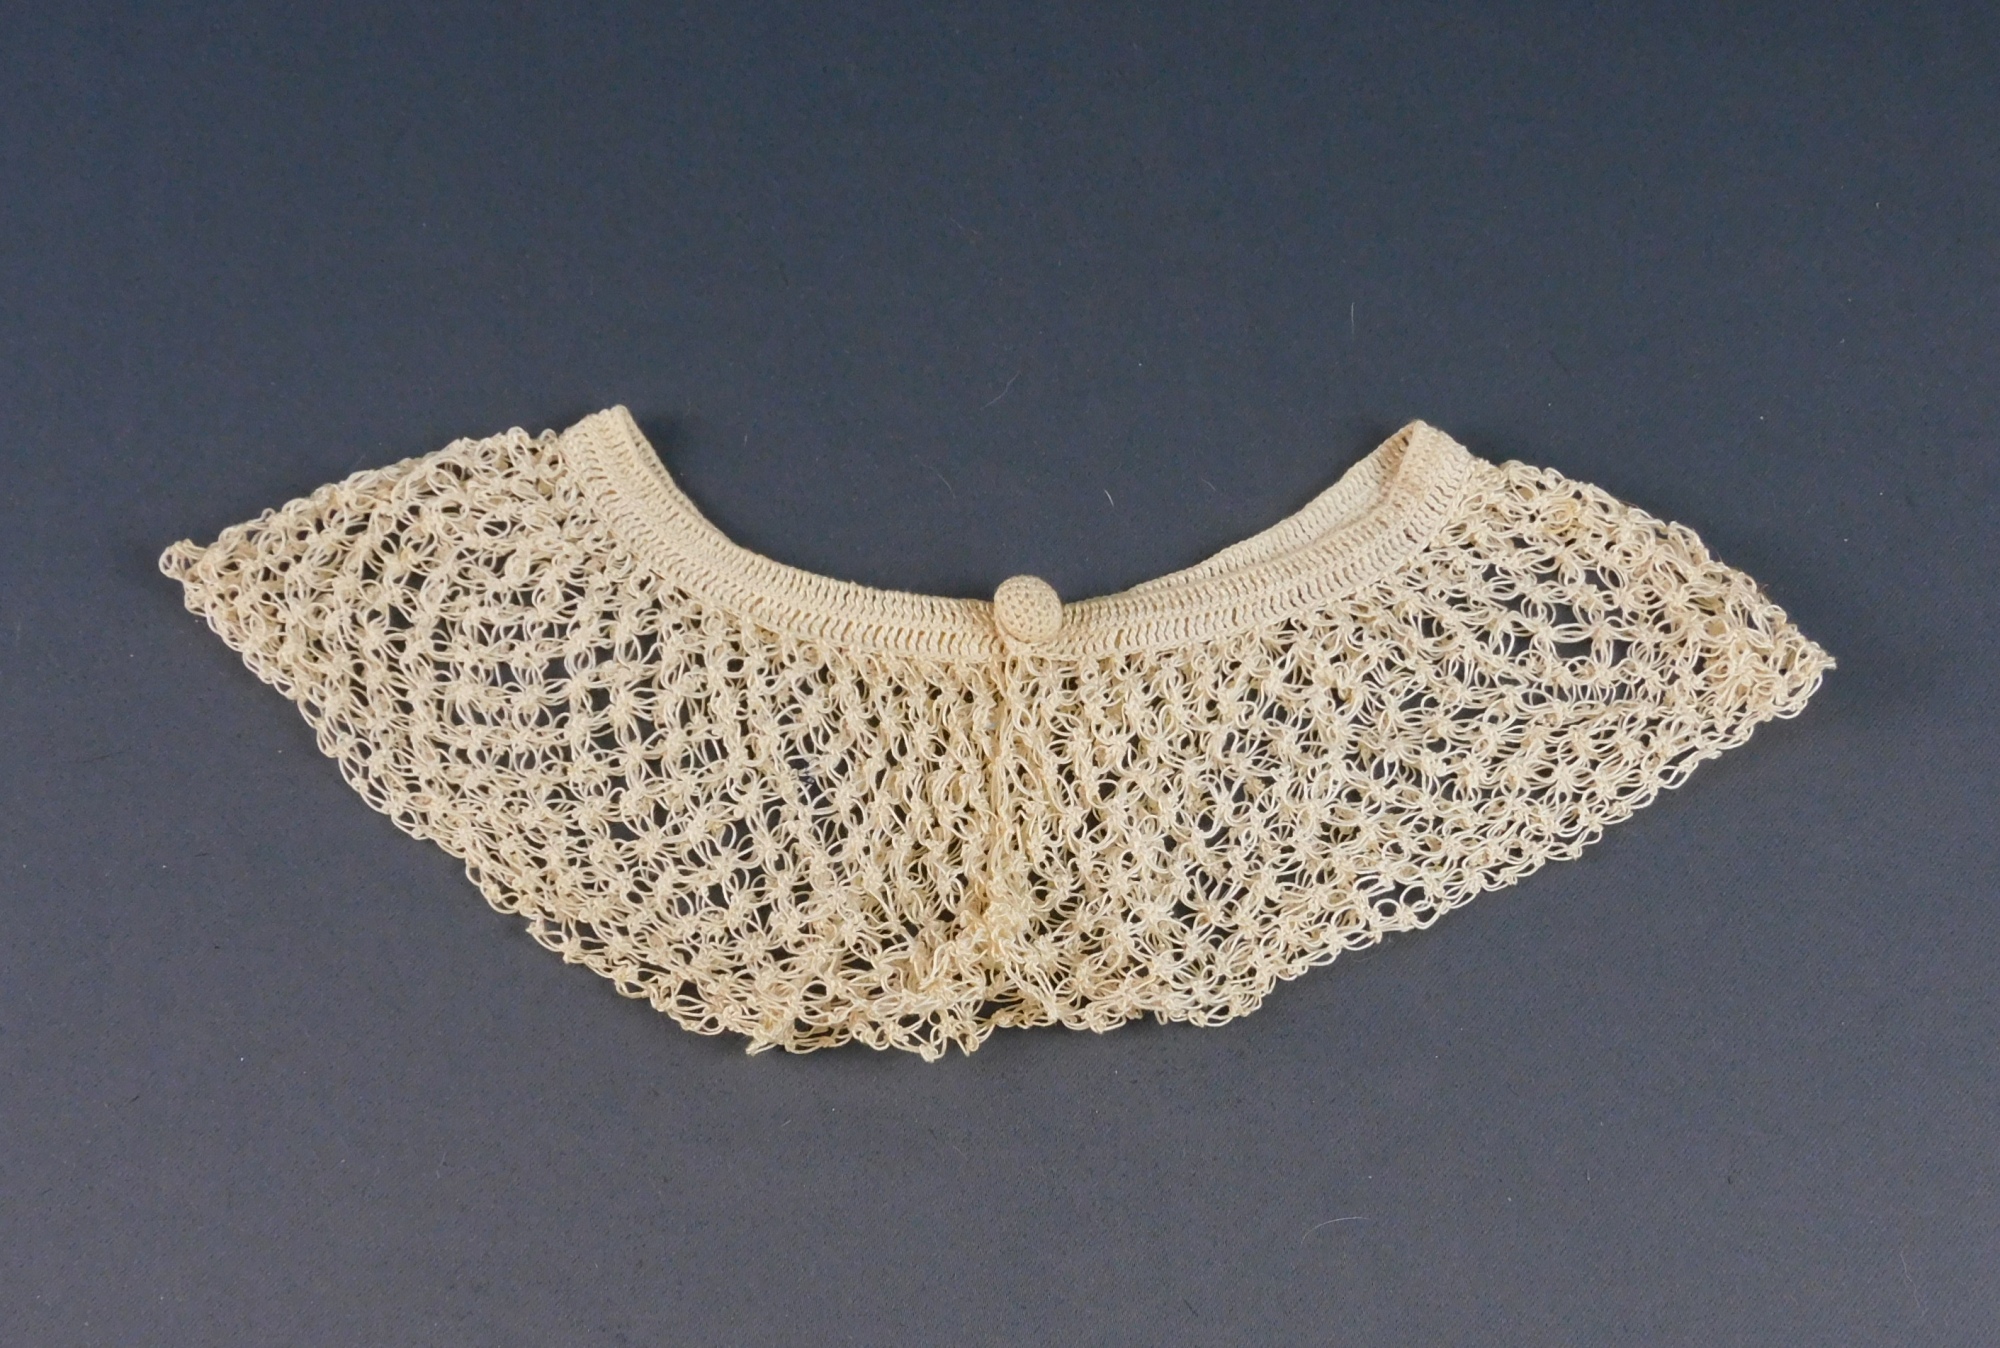 Antique Handmade Lace Collar with Crochet Button, Edwardian 1900s